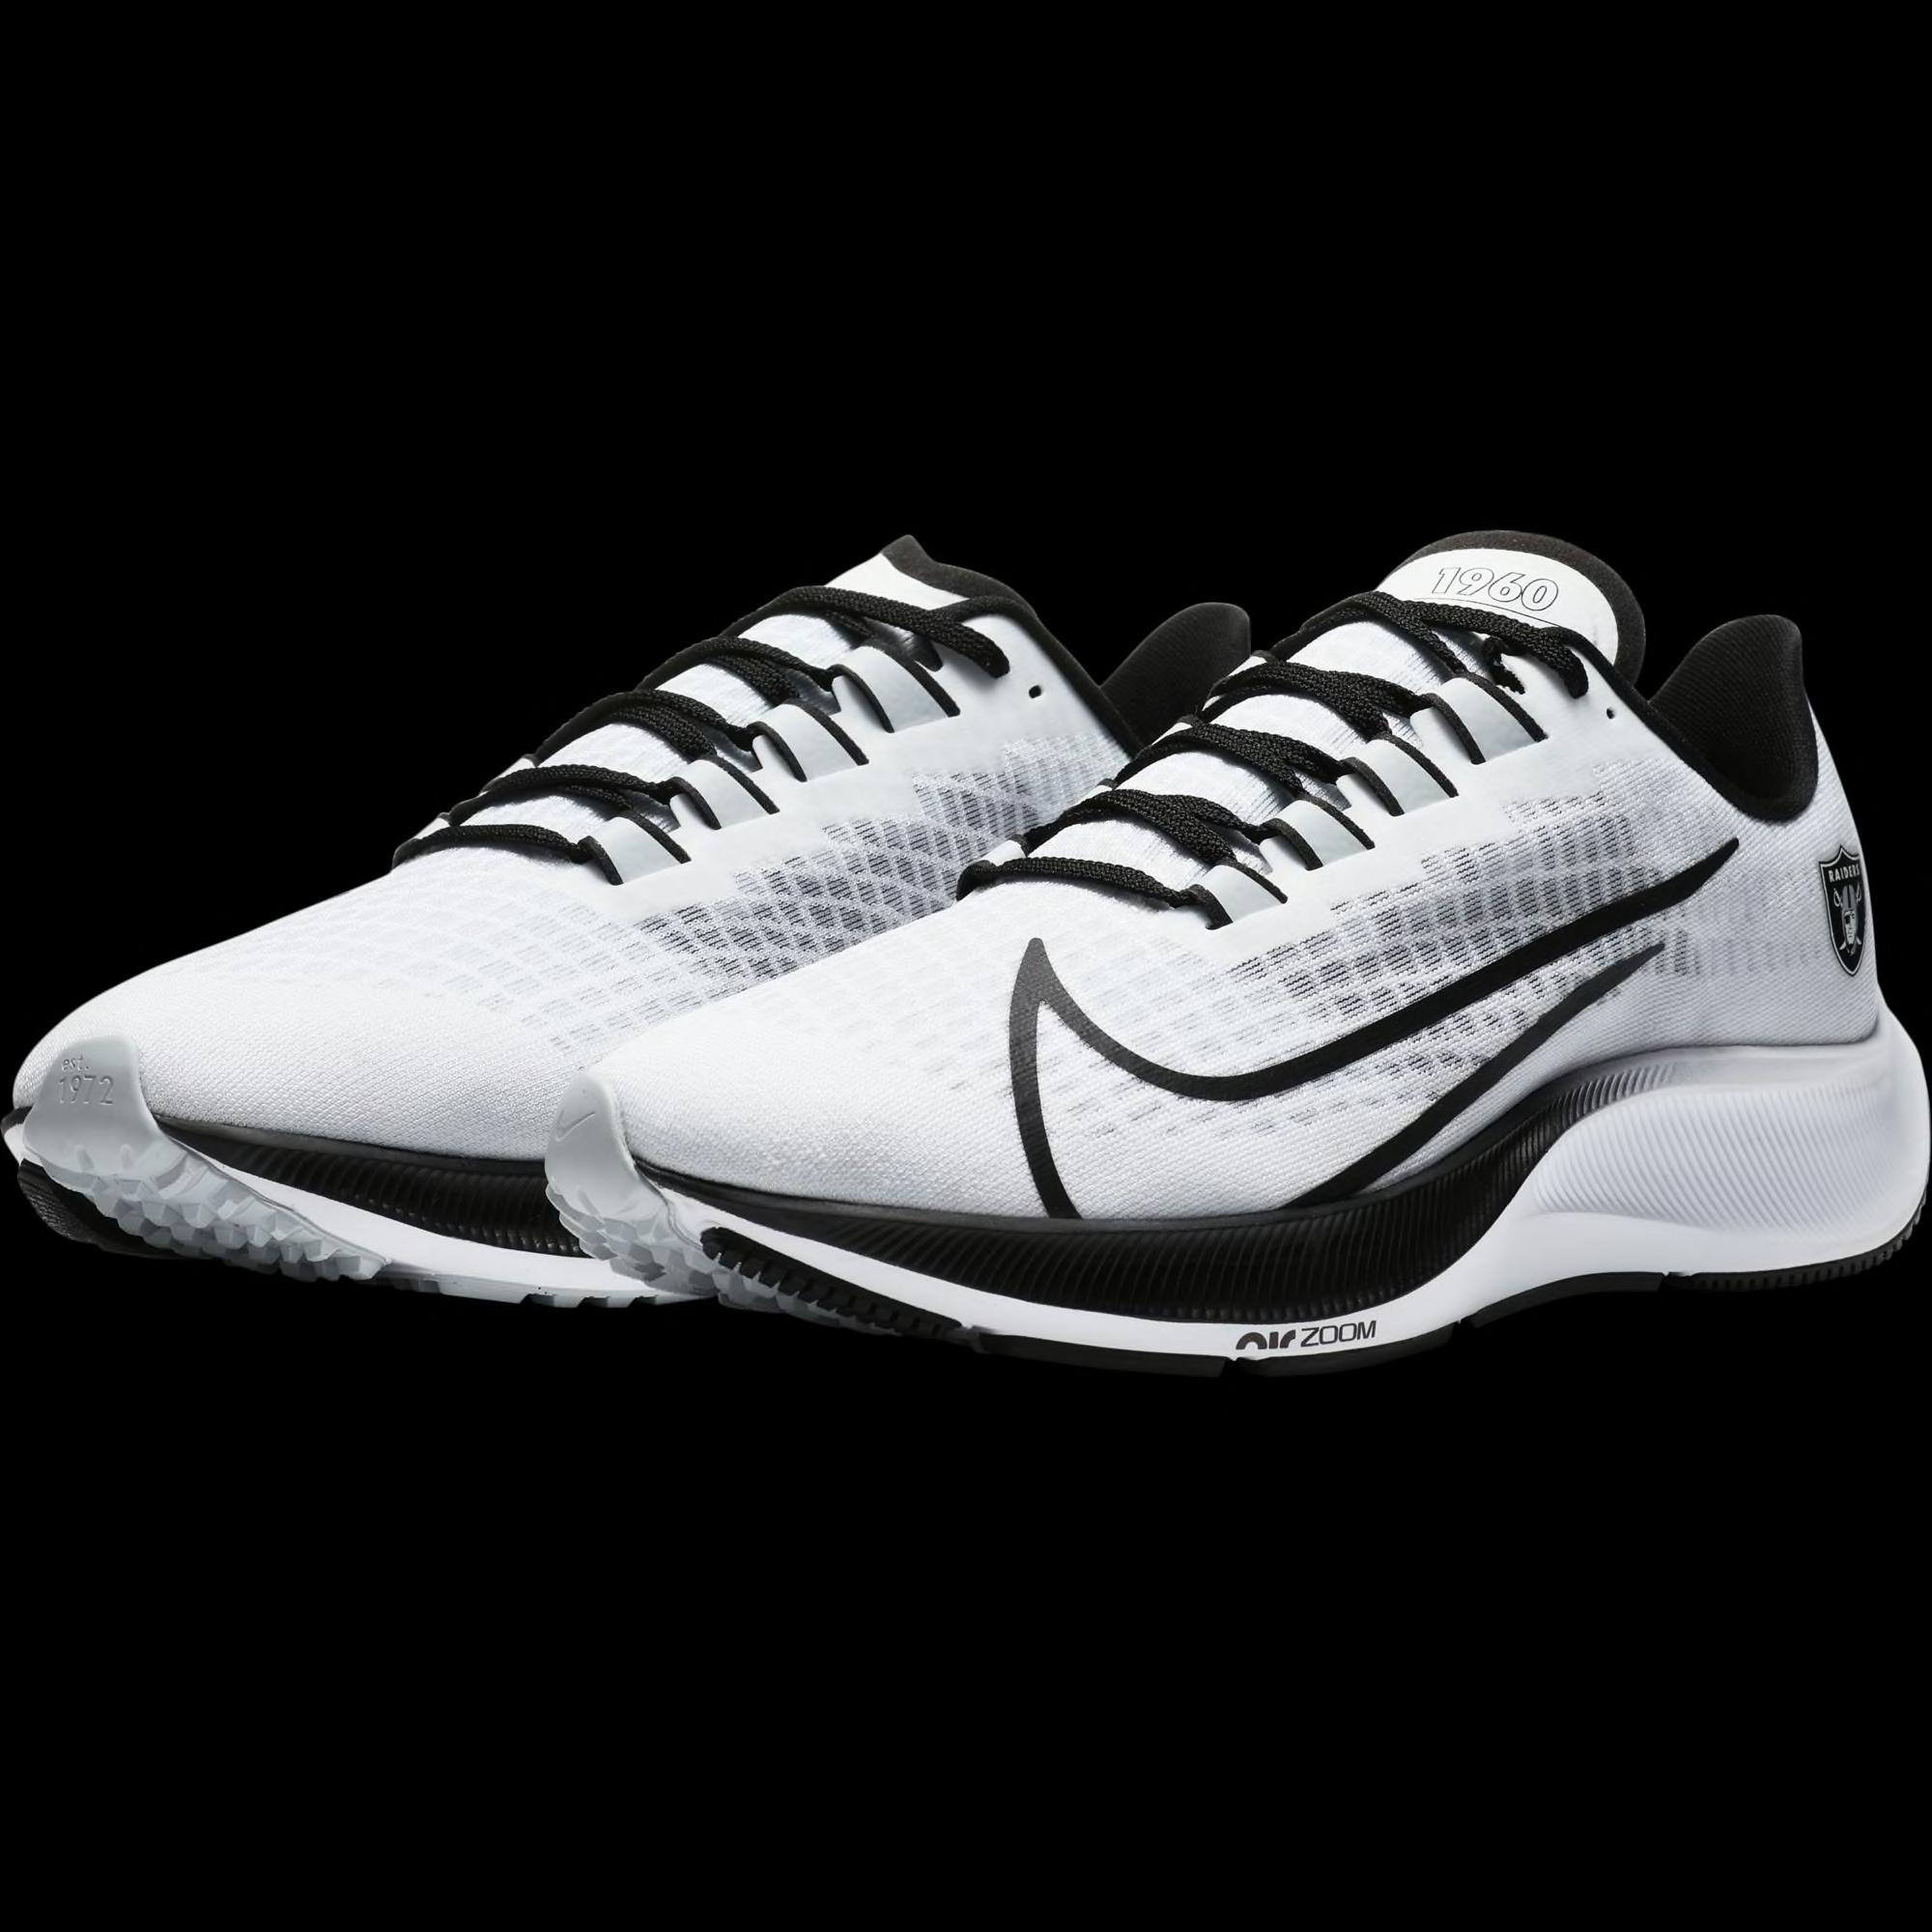 These new Las Vegas Raiders Nike shoes are awesome